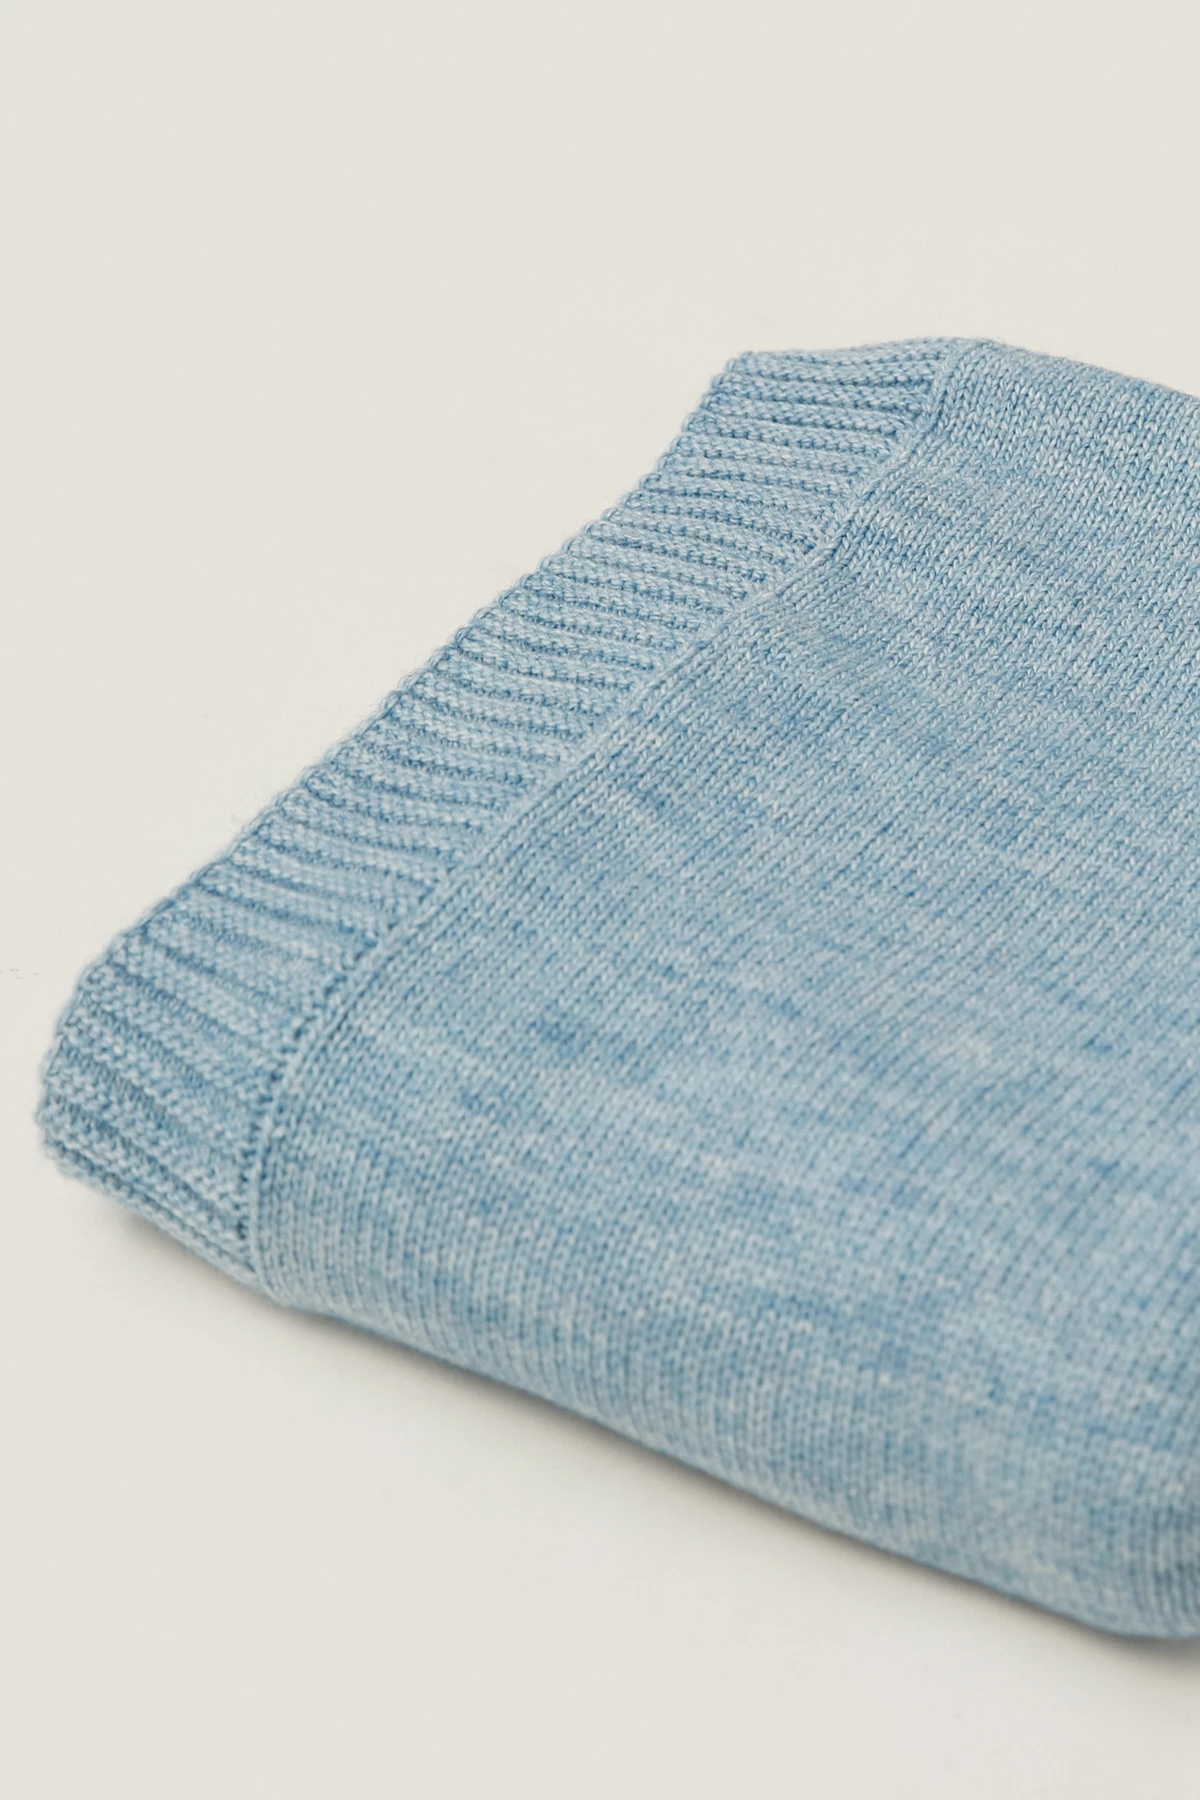 Blue knitted blanket with wool, photo 5